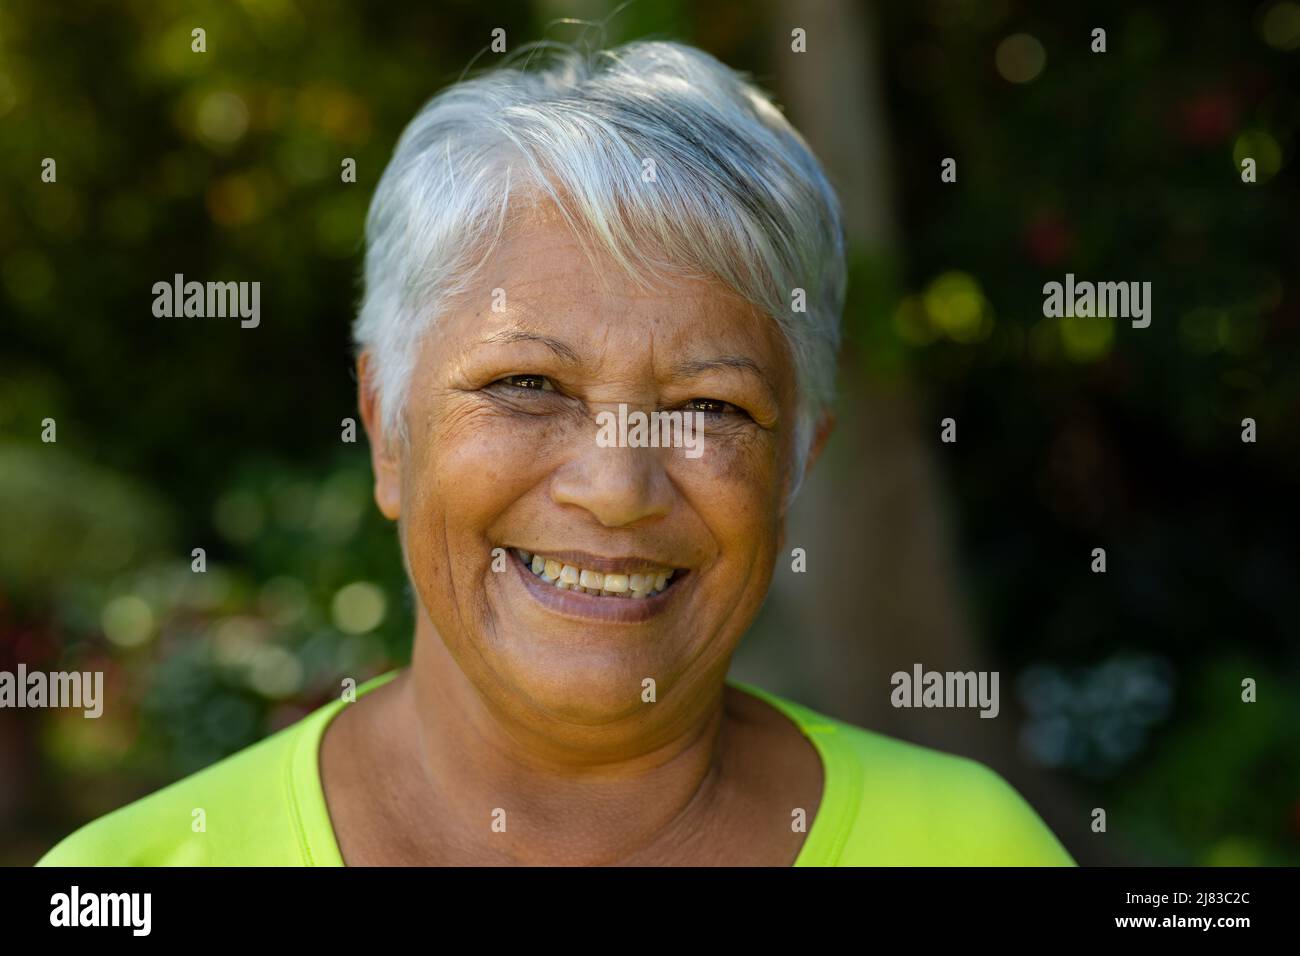 Close-up portrait of smiling biracial senior woman with short gray hair in yard Stock Photo